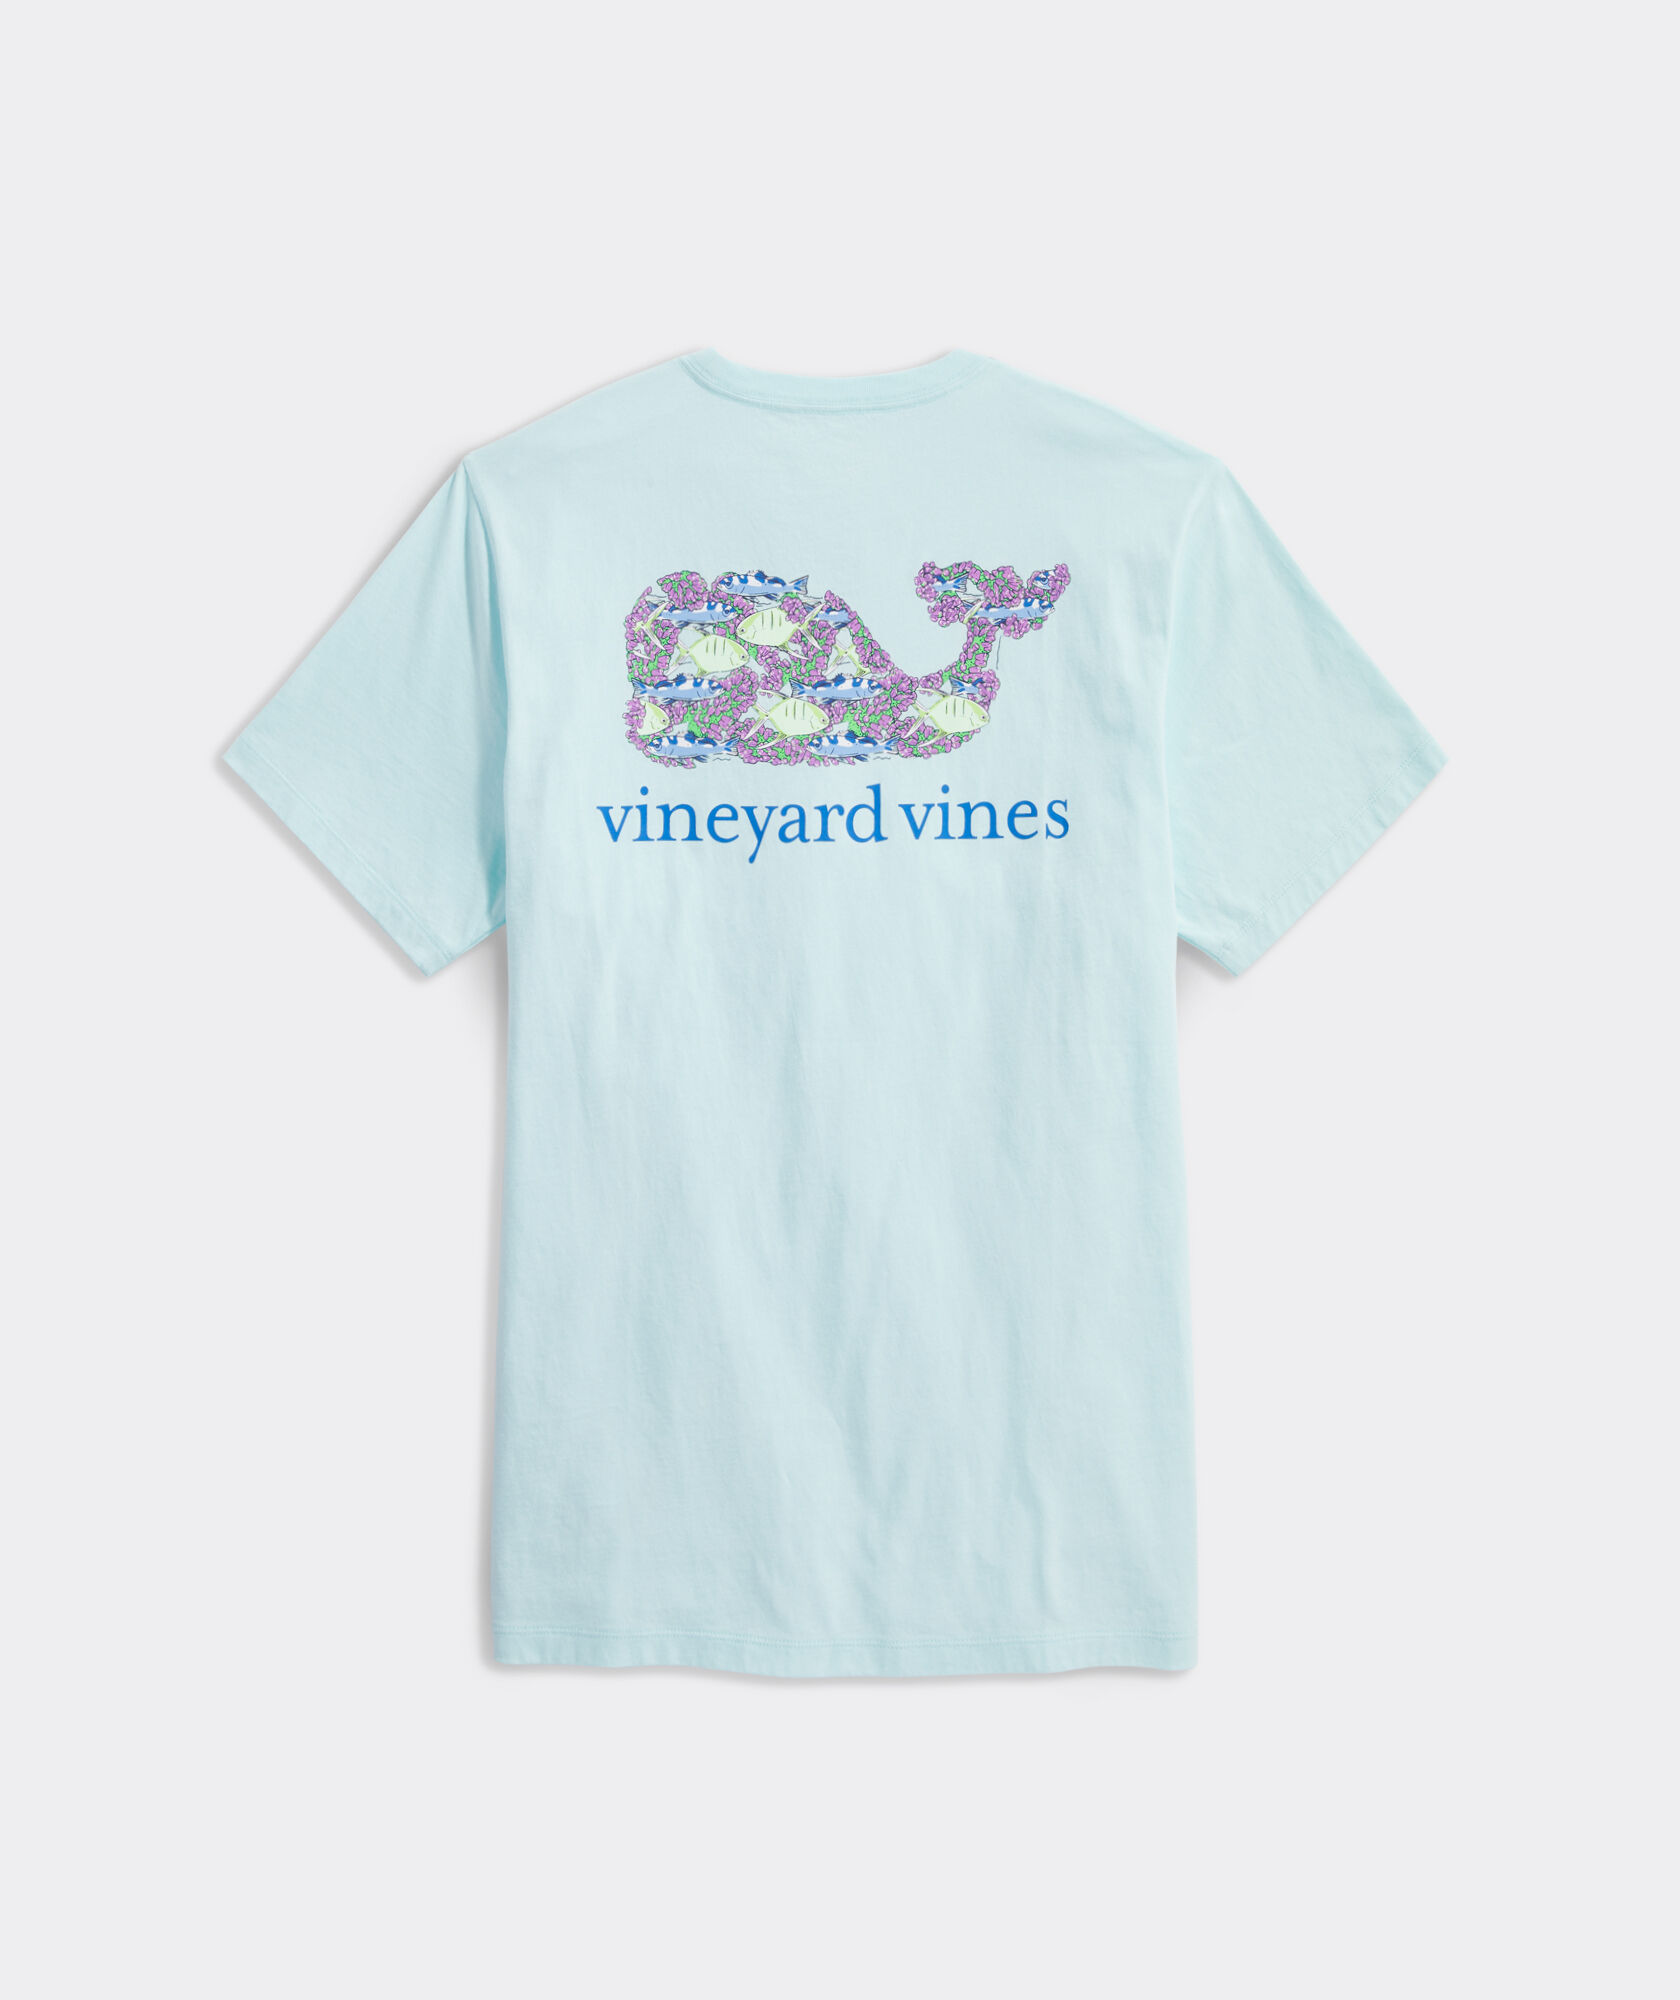 Shop Fish and Coral Whale Short-Sleeve Pocket Tee at vineyard vines